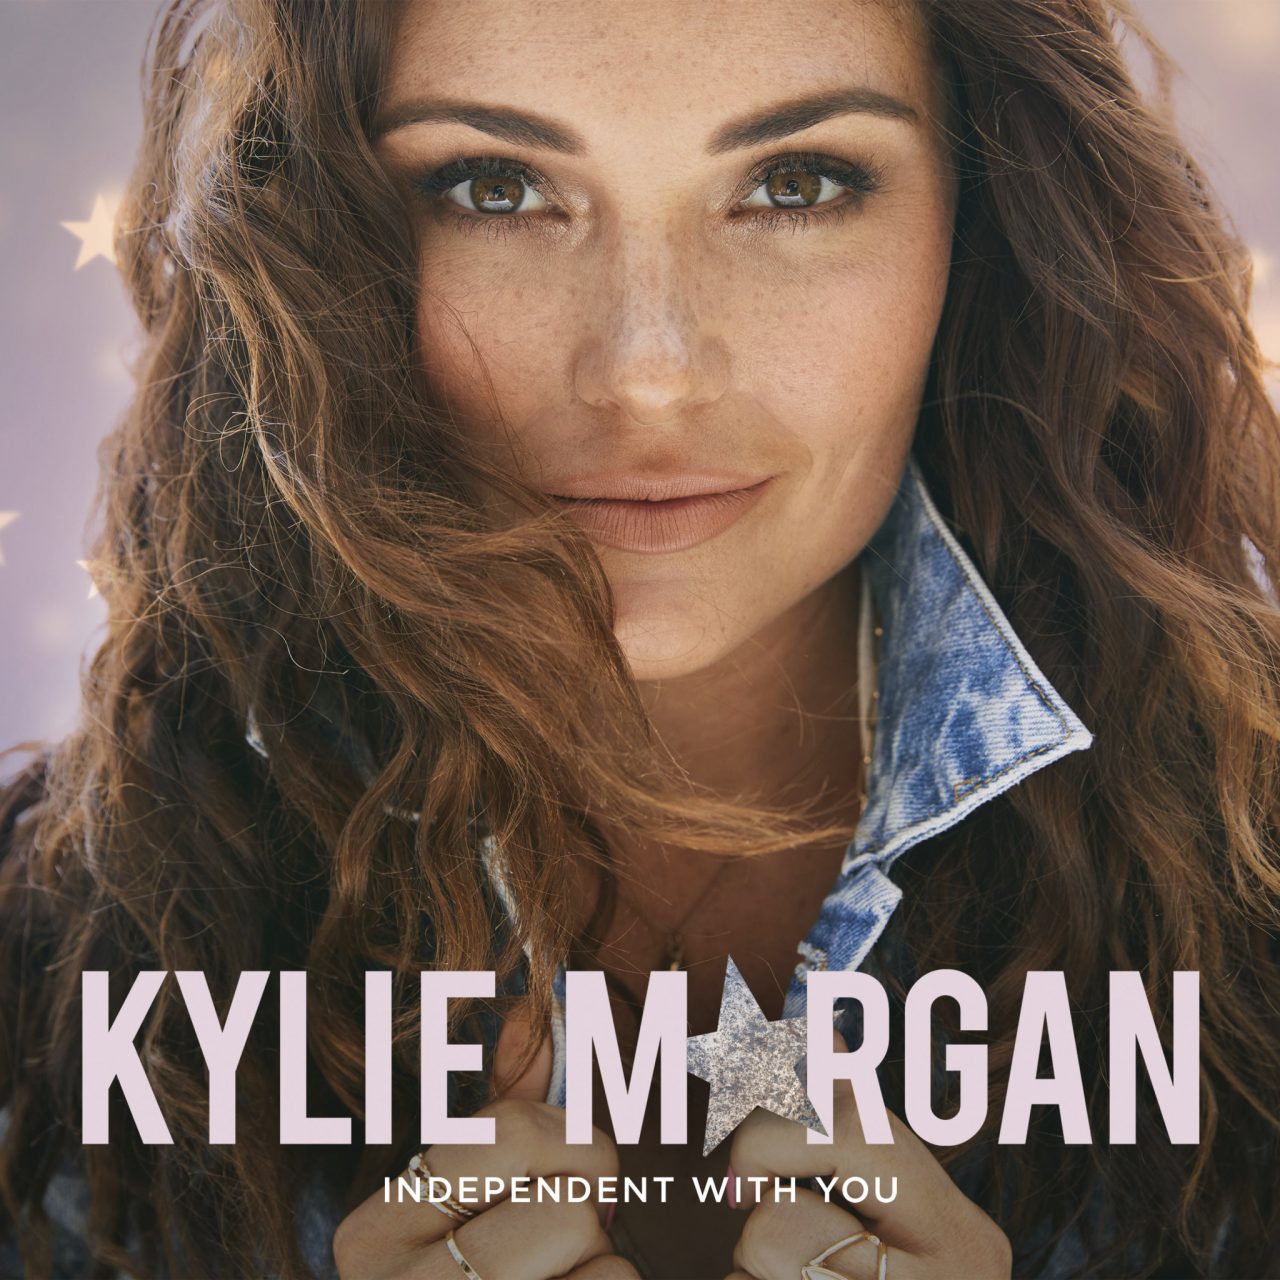 Kylie-Morgan-Independent-with-you-1649093083